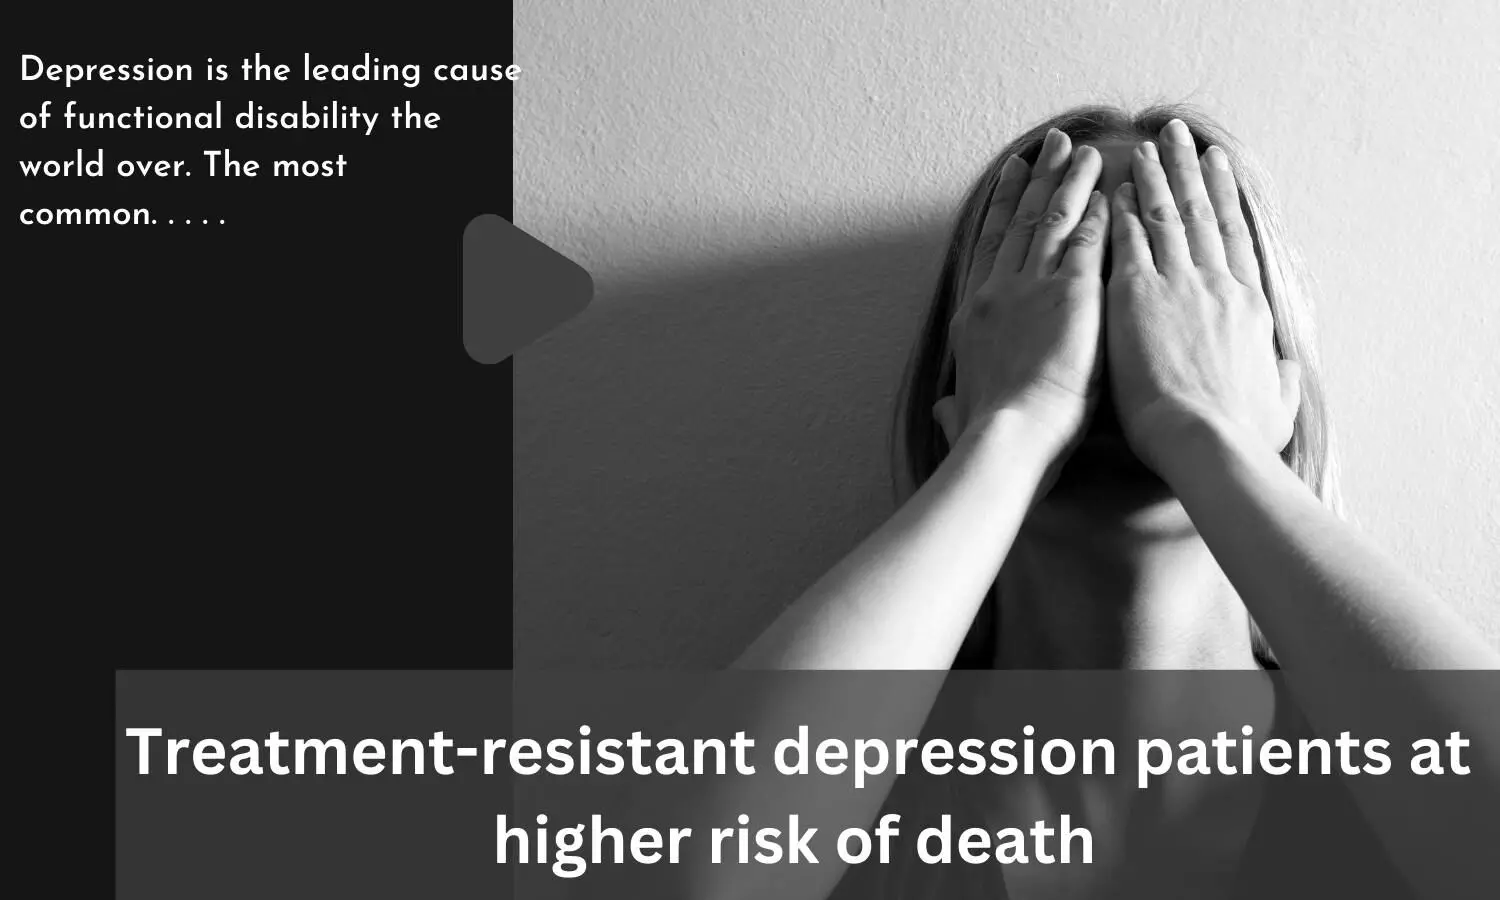 Treatment-resistant depression patients at higher risk of death